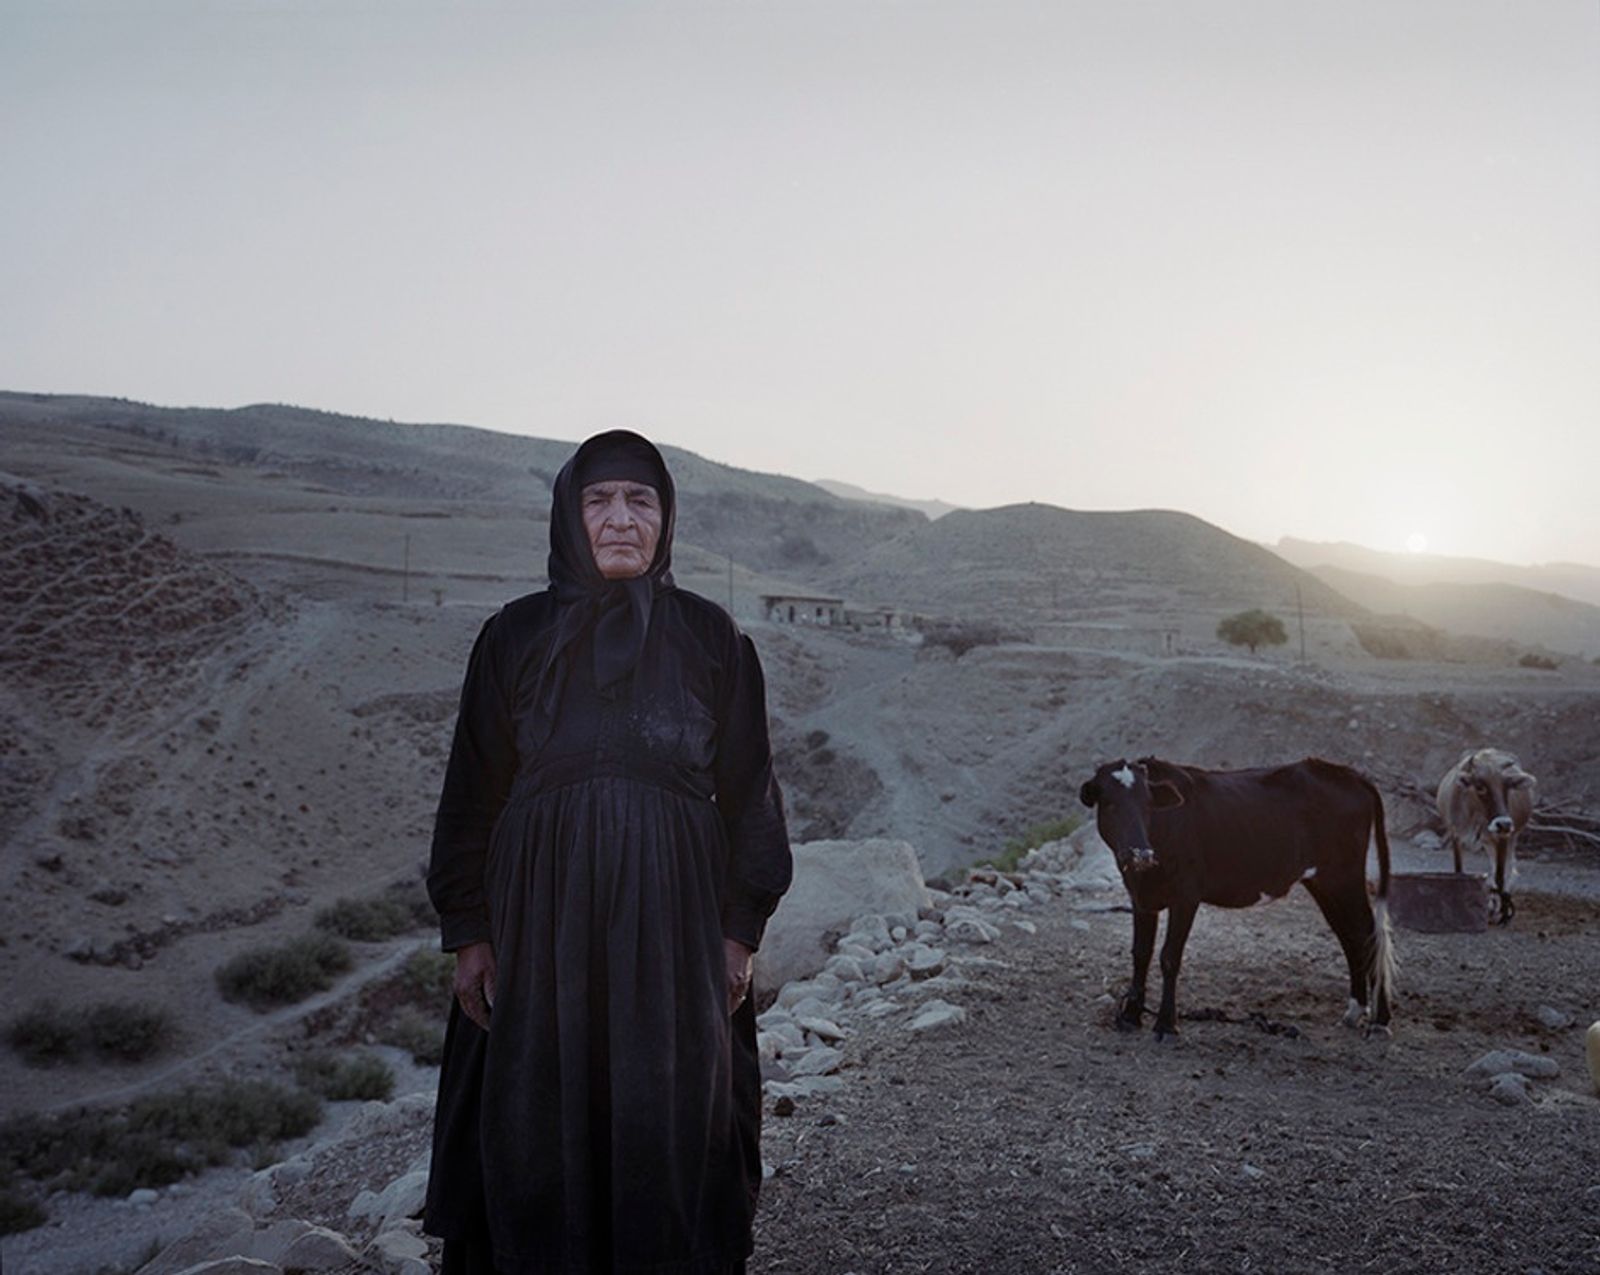 © Miriam Stanke, from the series, A Life on the Road - Nomads of Iran